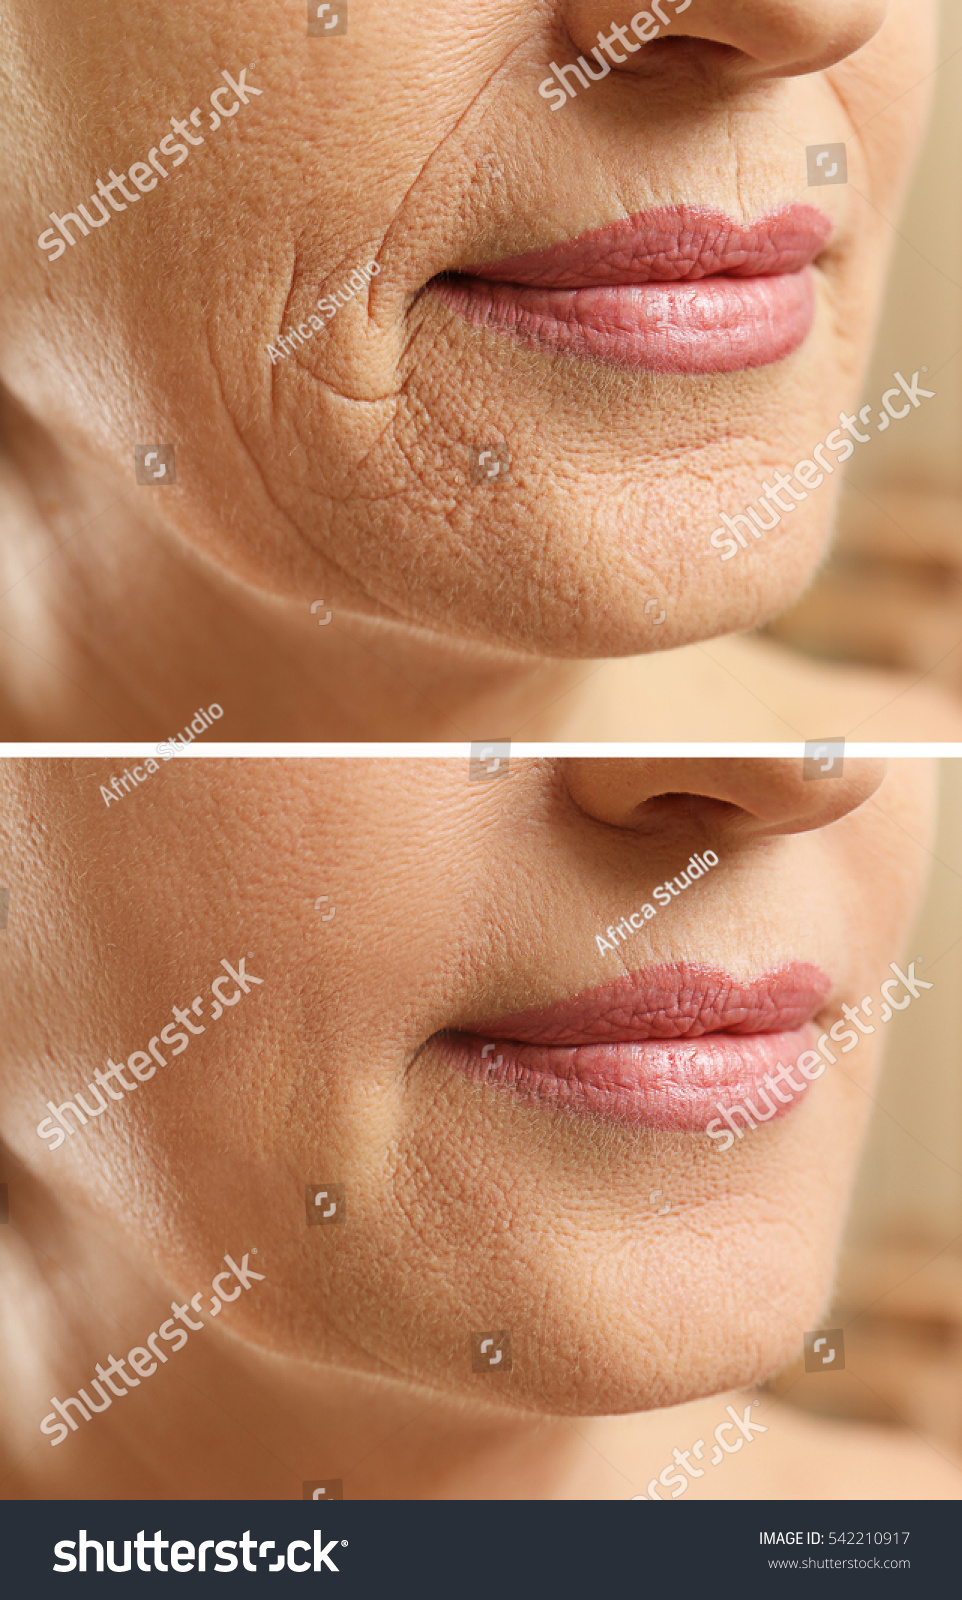 Mature woman face before and after cosmetic procedure. Plastic surgery concept. #542210917